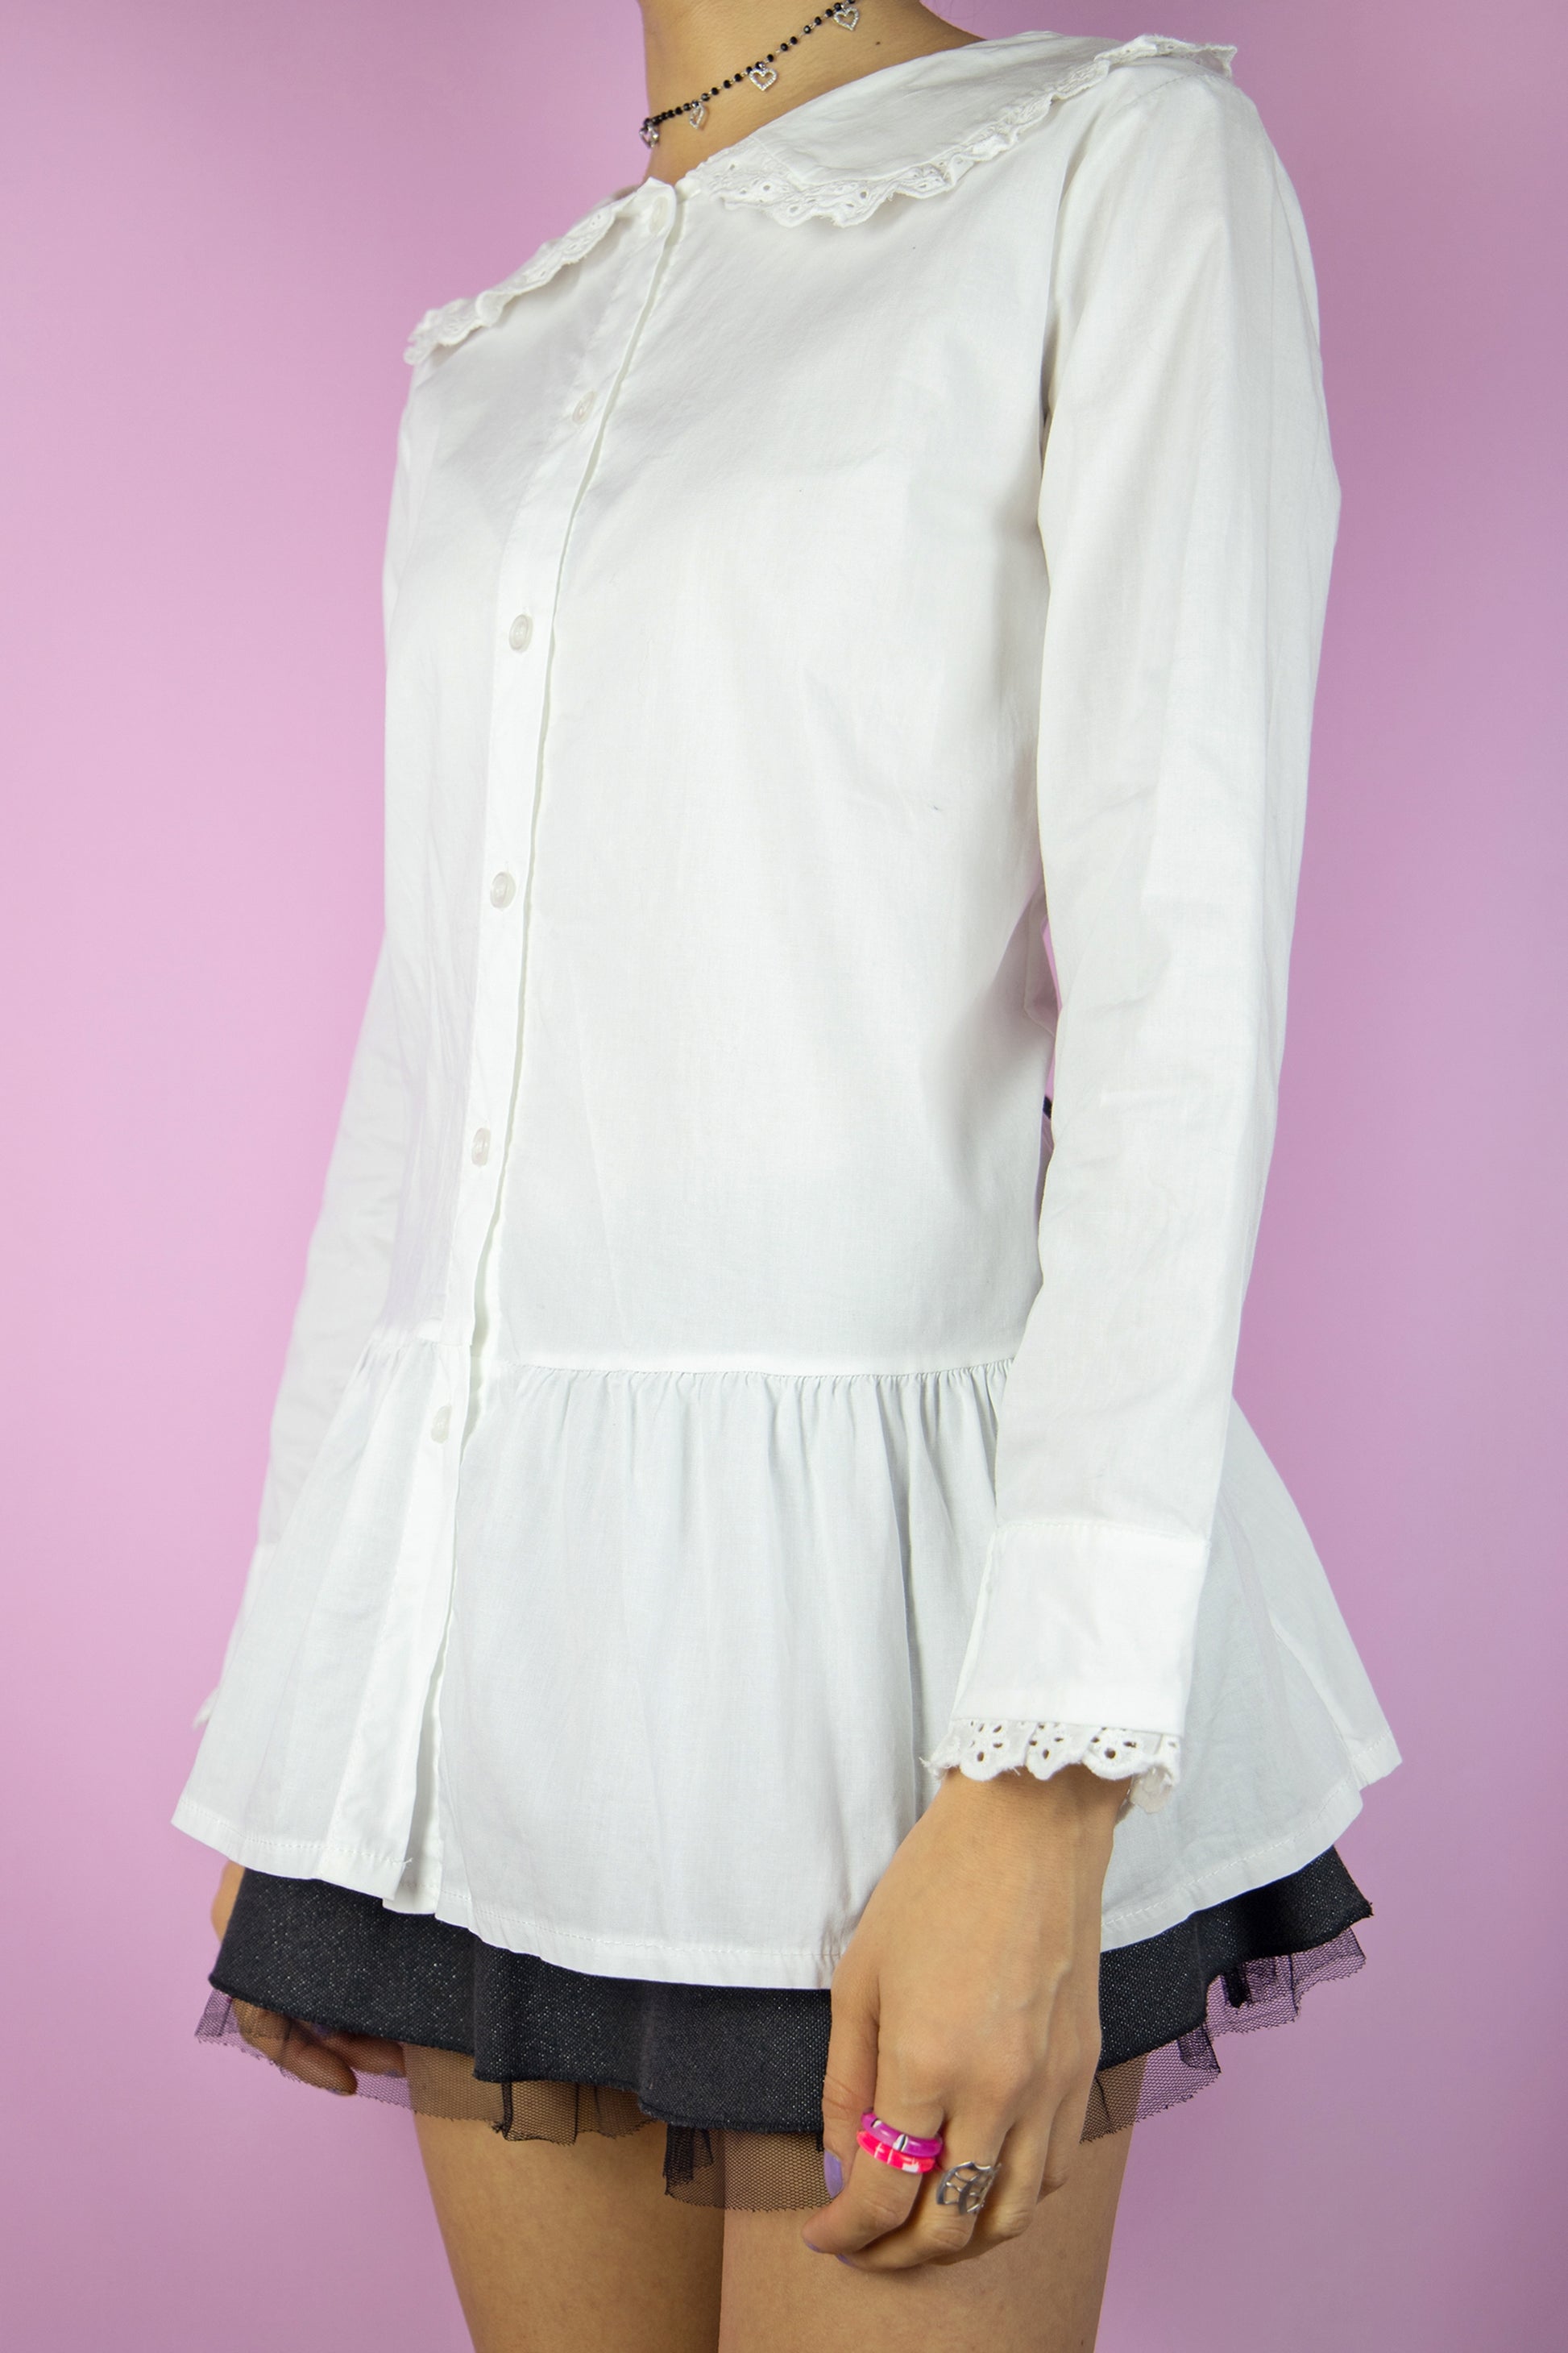 The Y2K White Big Collar Blouse is a vintage oversized collar shirt with buttons, ruffle hem, and lace trim. Cottage prairie 2000s preppy office coquette blouse.